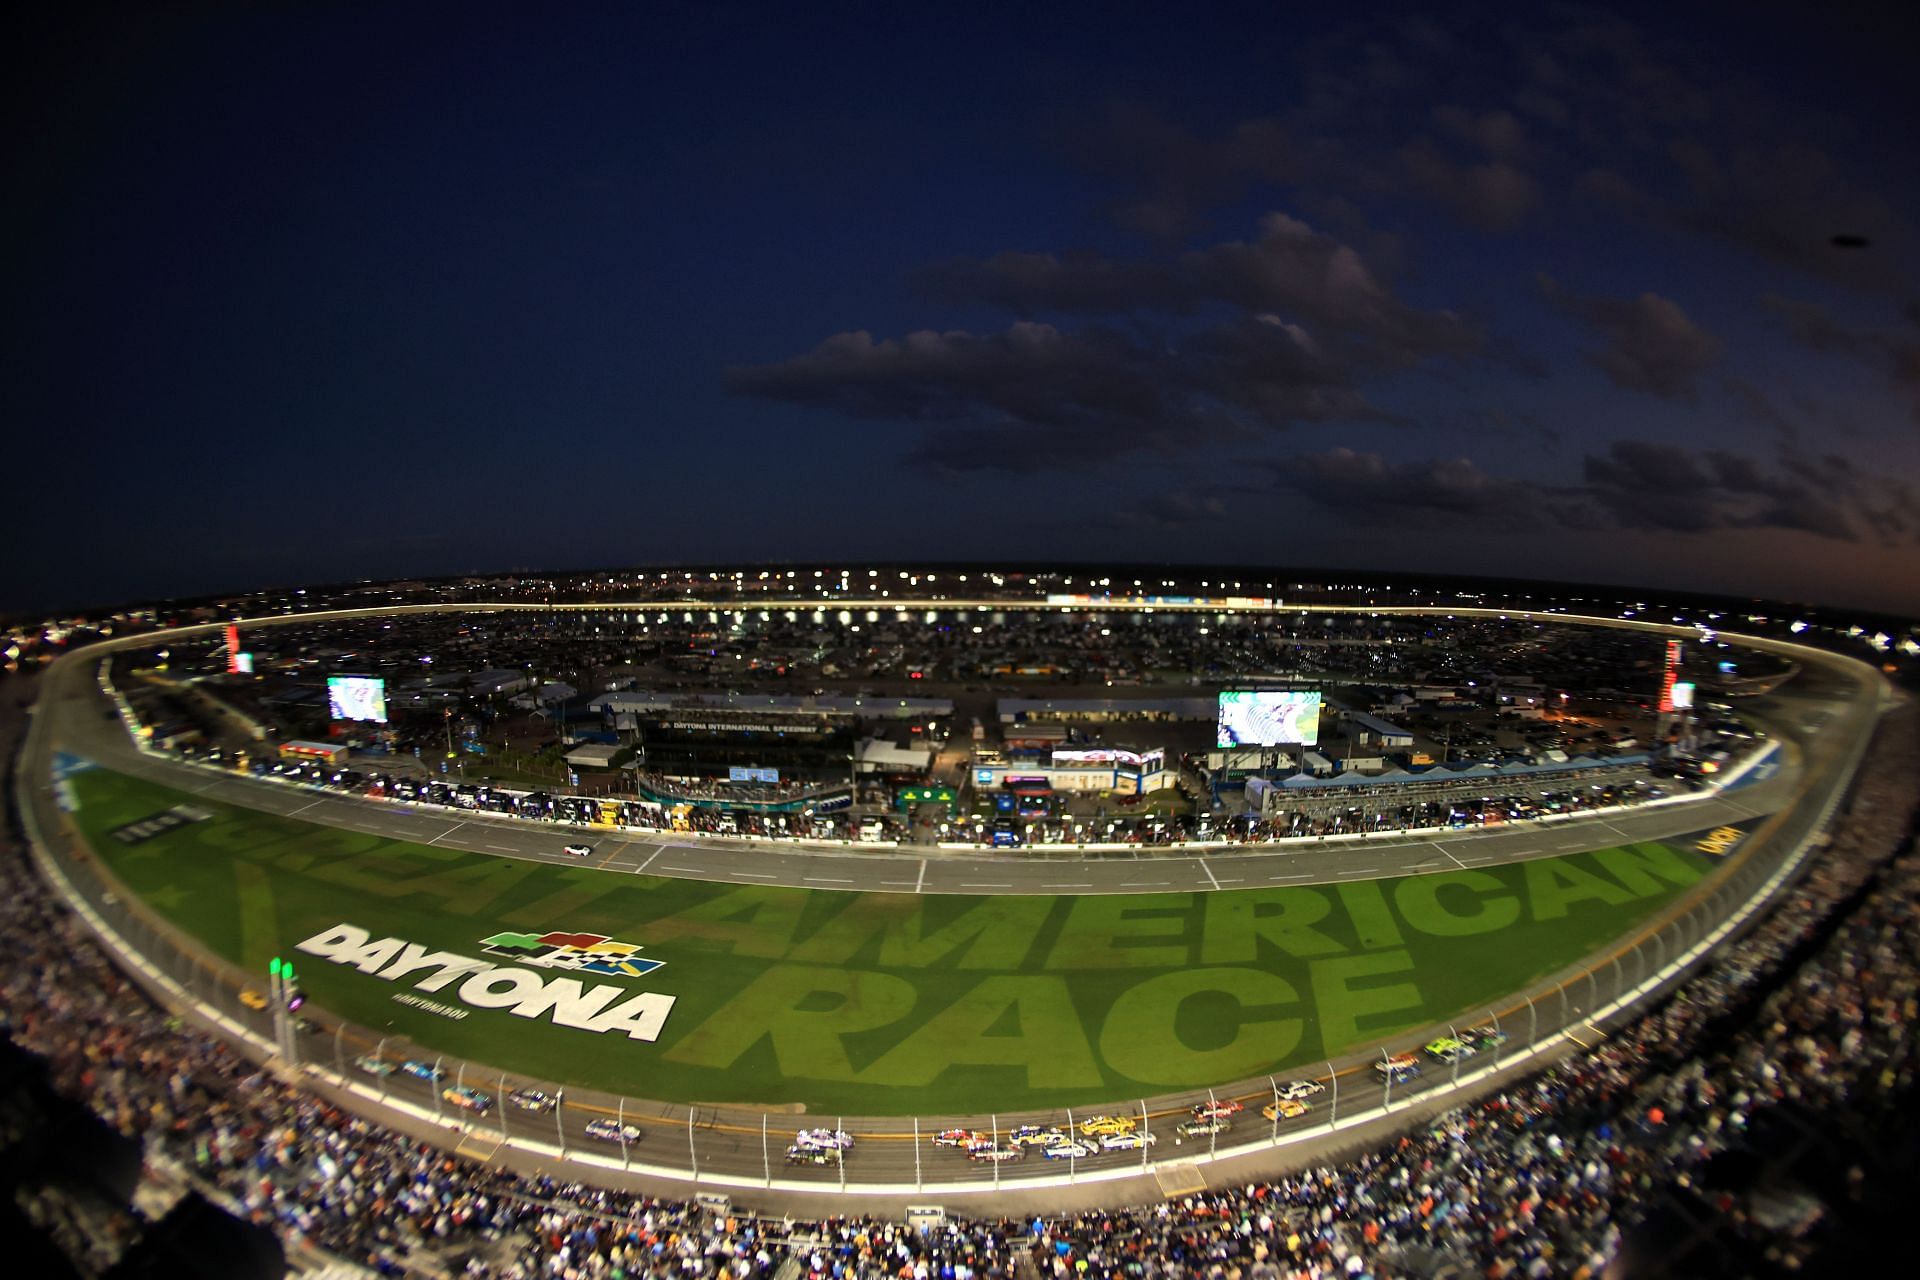 A general view of during the NASCAR Cup Series 64th Annual Daytona 500 at Daytona International Speedway. (Photo by Mike Ehrmann/Getty Images)